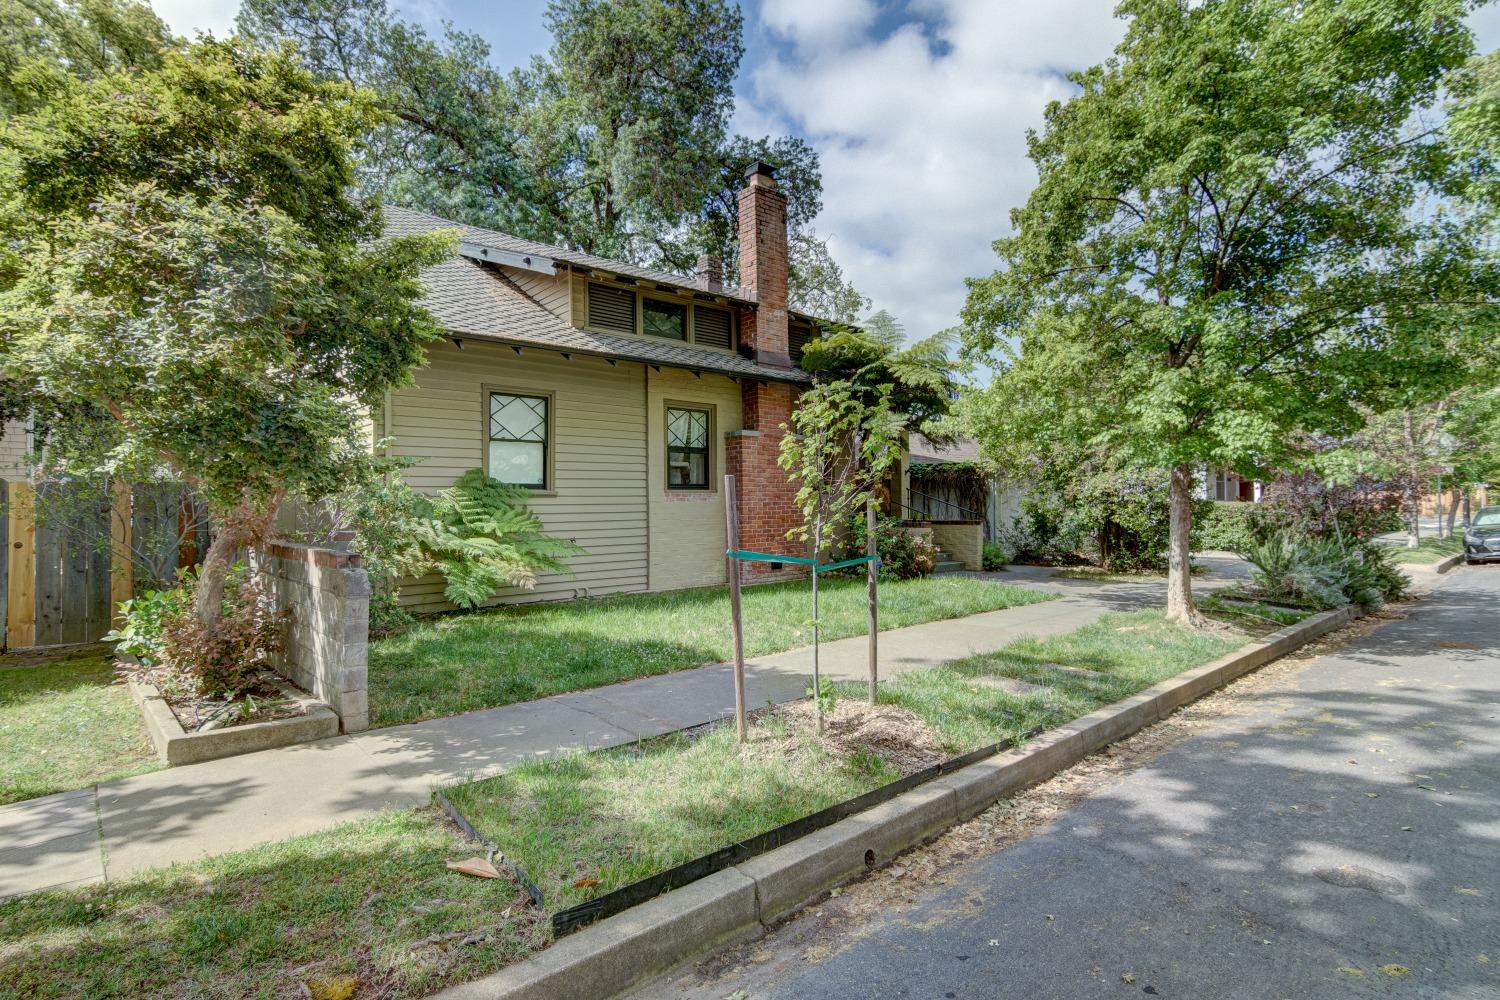 Meticulously maintained piece of history nestled in the desirable Curtis Park neighborhood. The time